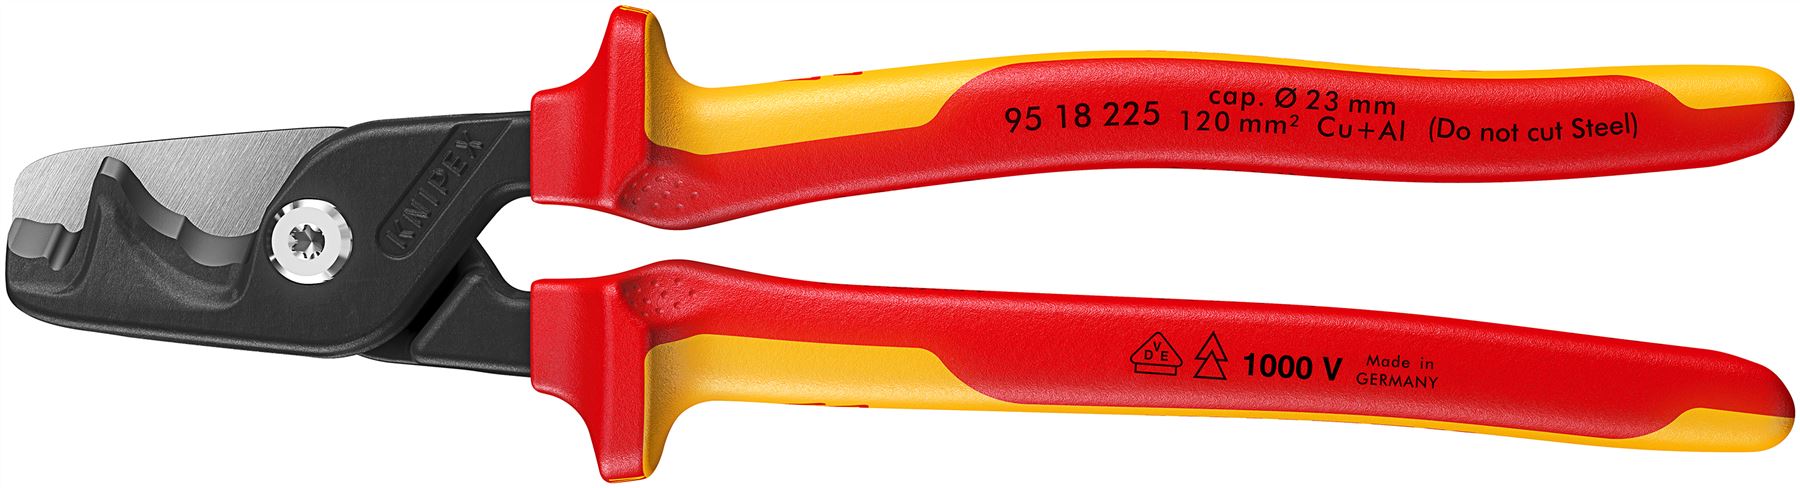 KNIPEX StepCut XL Cable Shears Cutting Pliers 225mm VDE Insulated Multi Component Grips 95 18 225